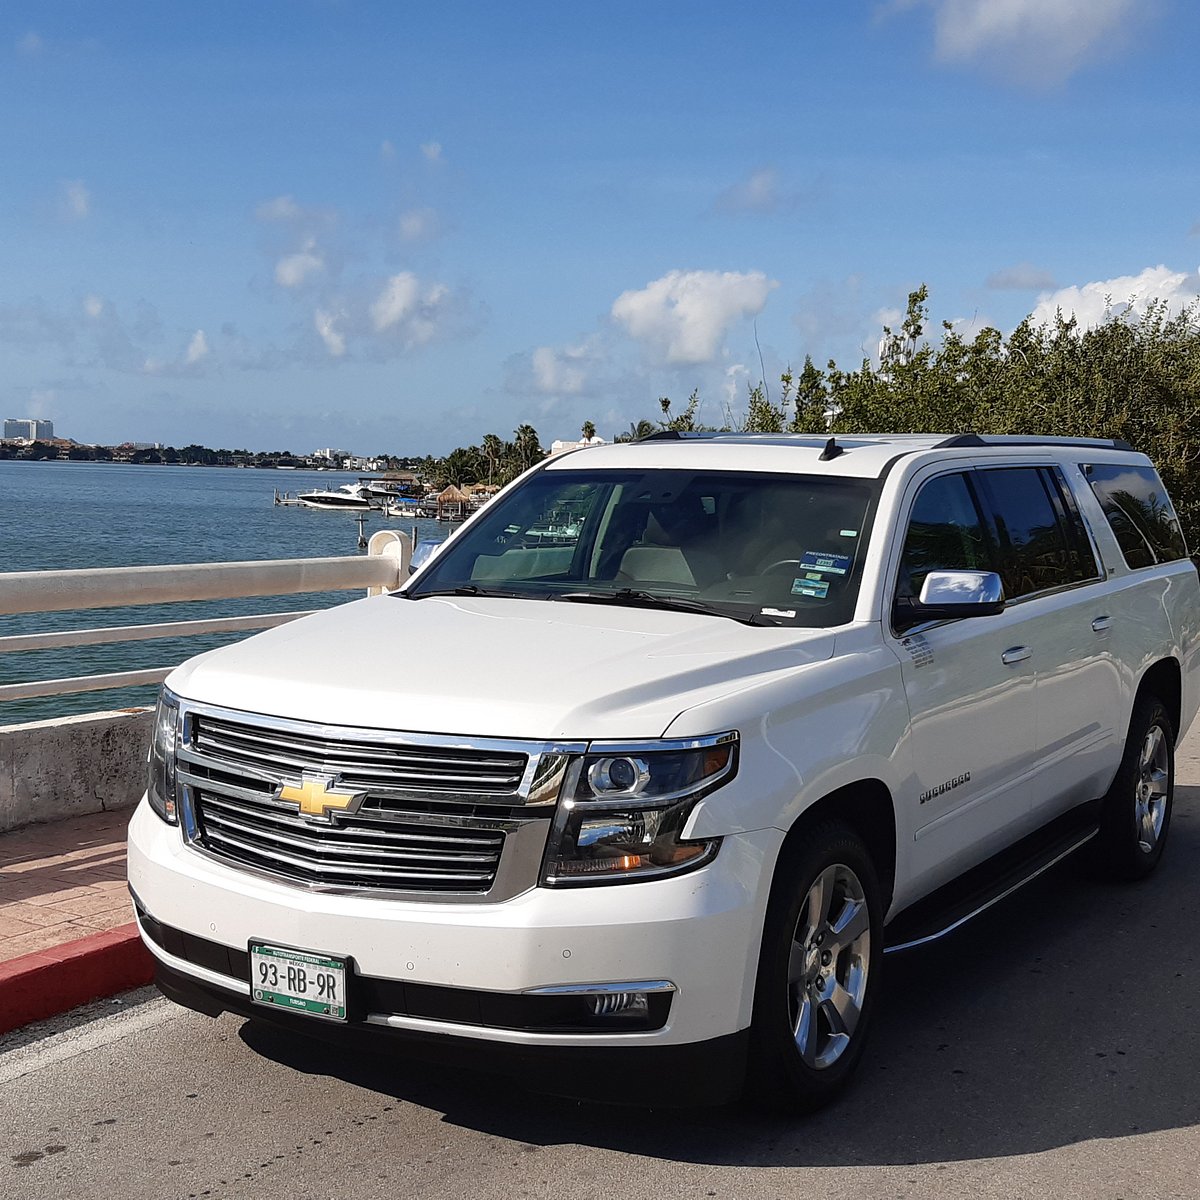 cancun shuttle and tours reviews